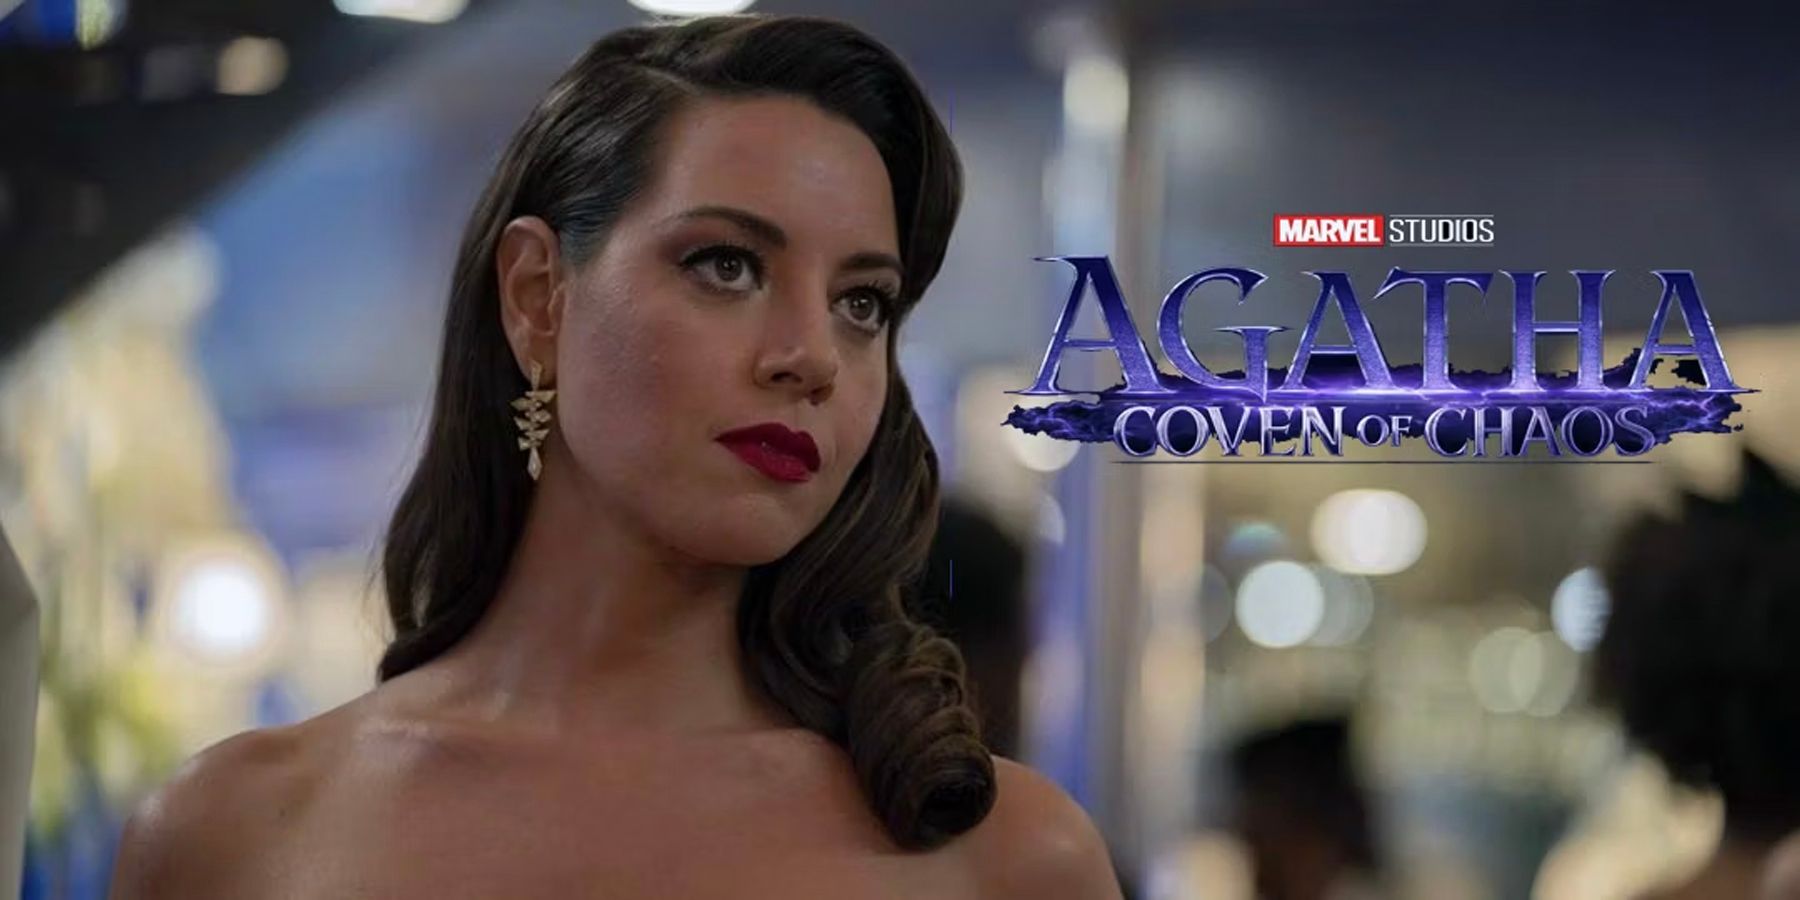 Aubrey Plazas Agatha Coven Of Chaos Character Revealed To Fans